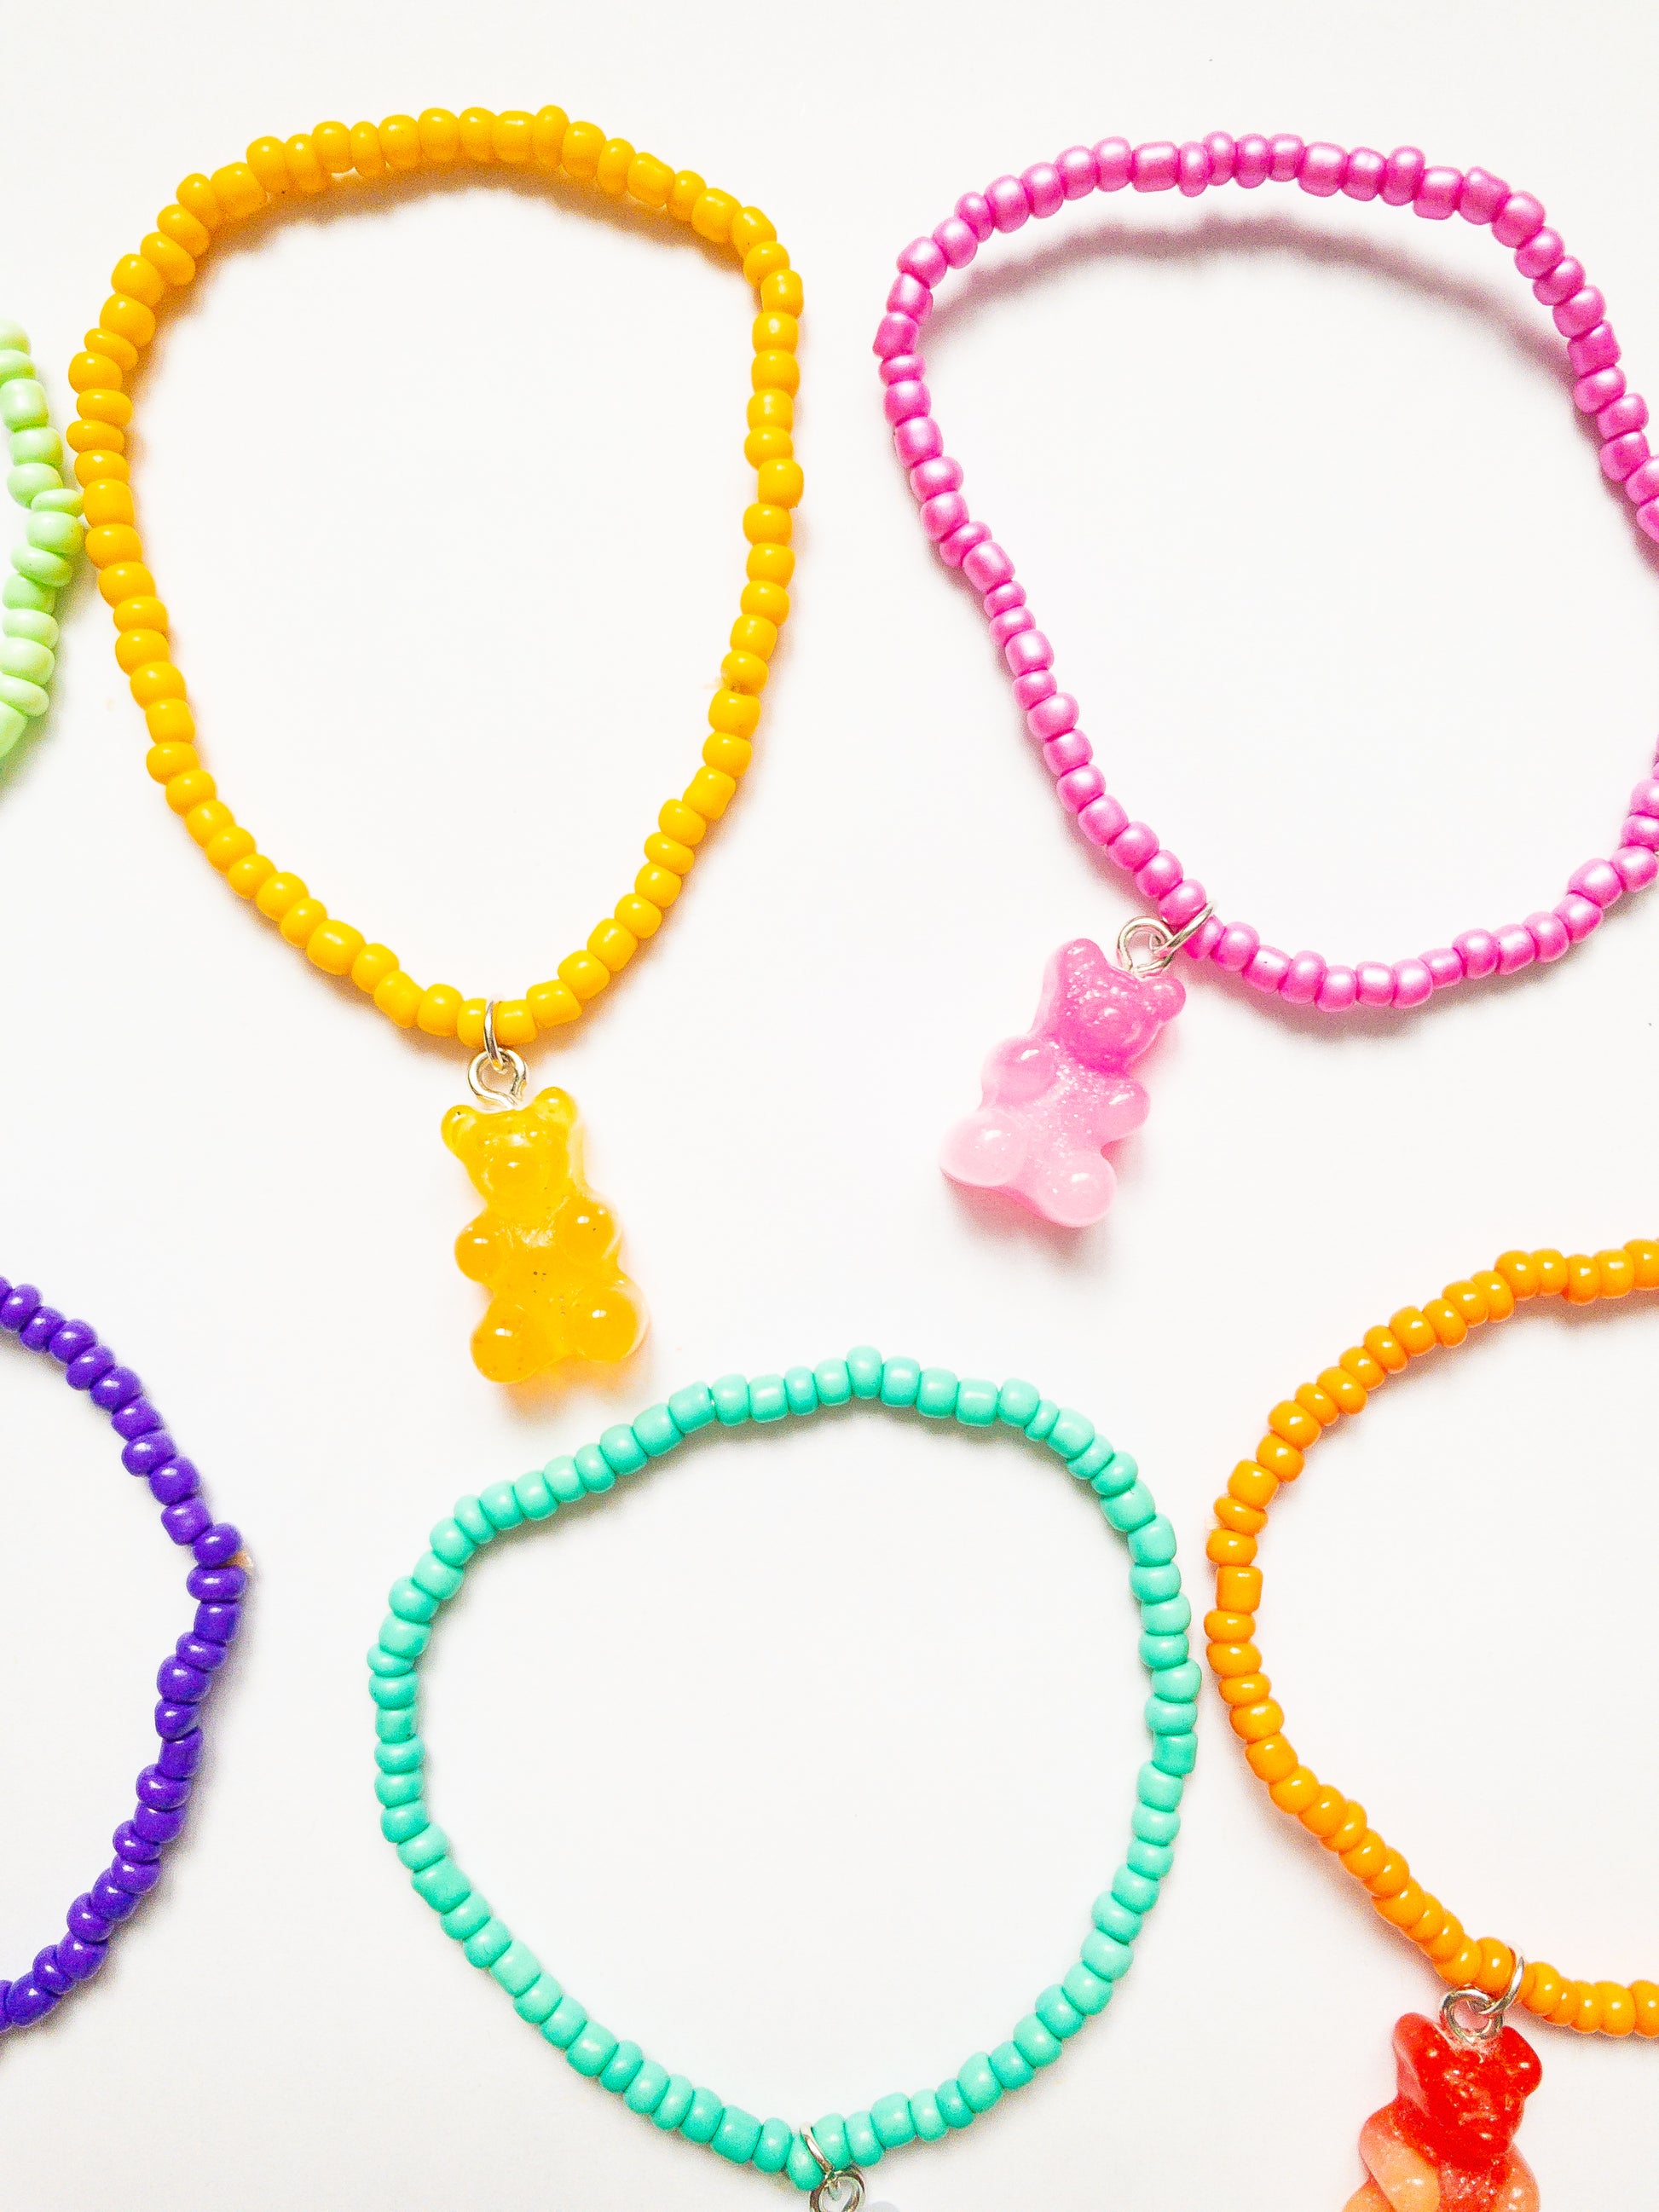 A delectable set of 6 ombre and glittery gummy bear charms on colorful stretchy beaded bracelets. 